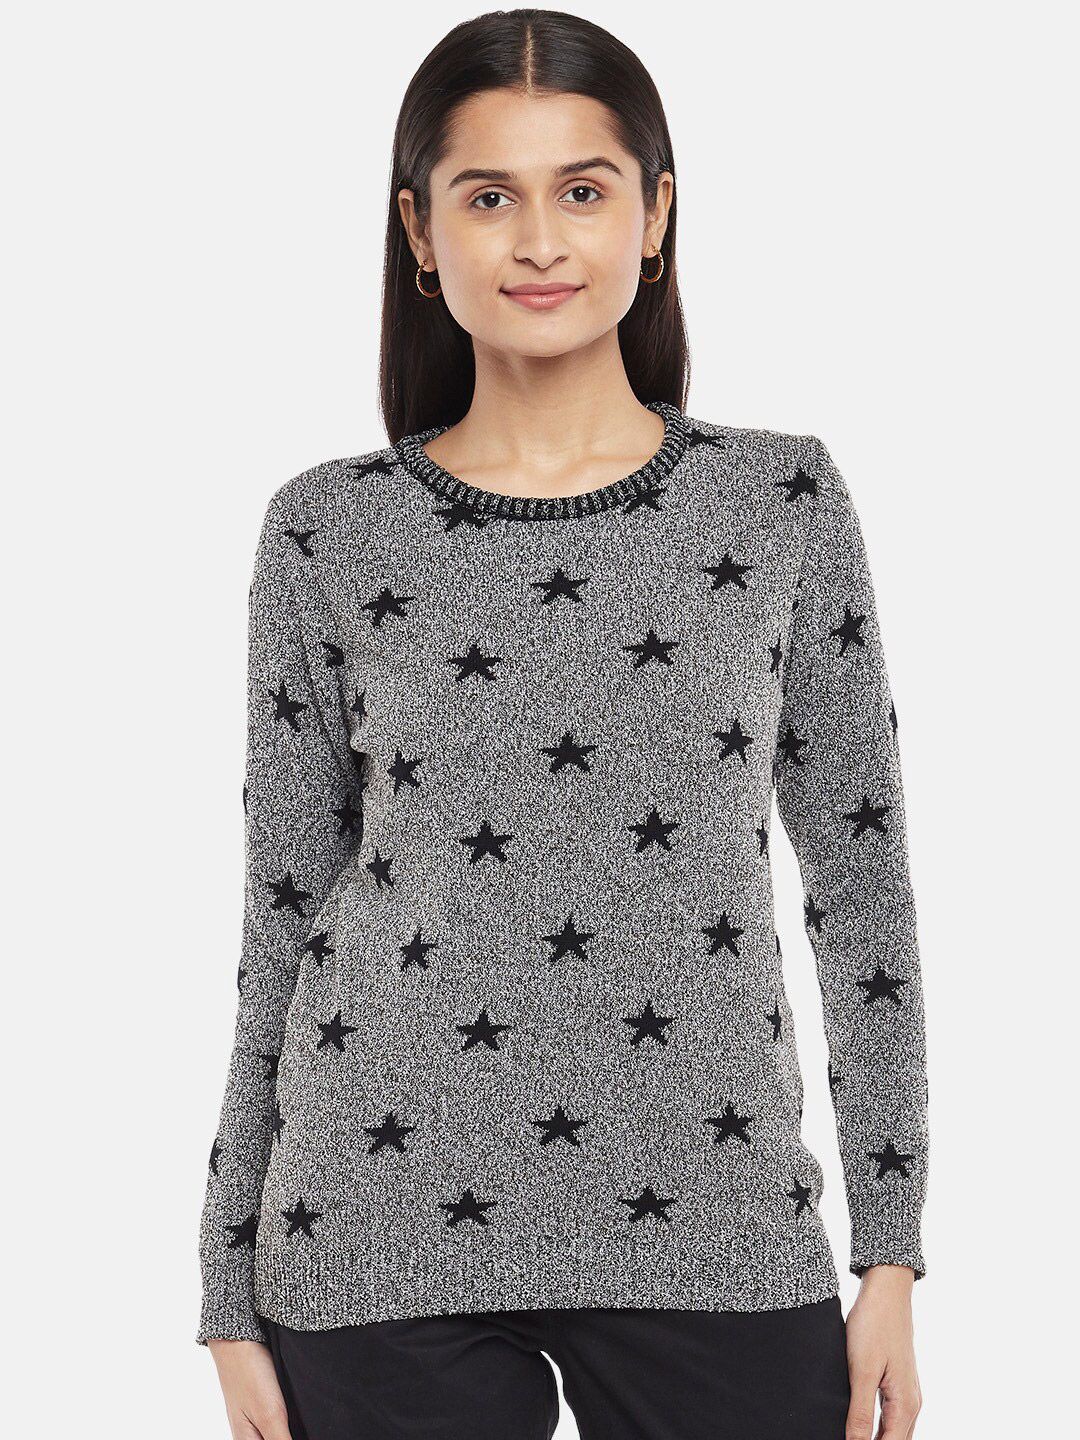 Honey by Pantaloons Women Grey & Black Printed Pullover Price in India